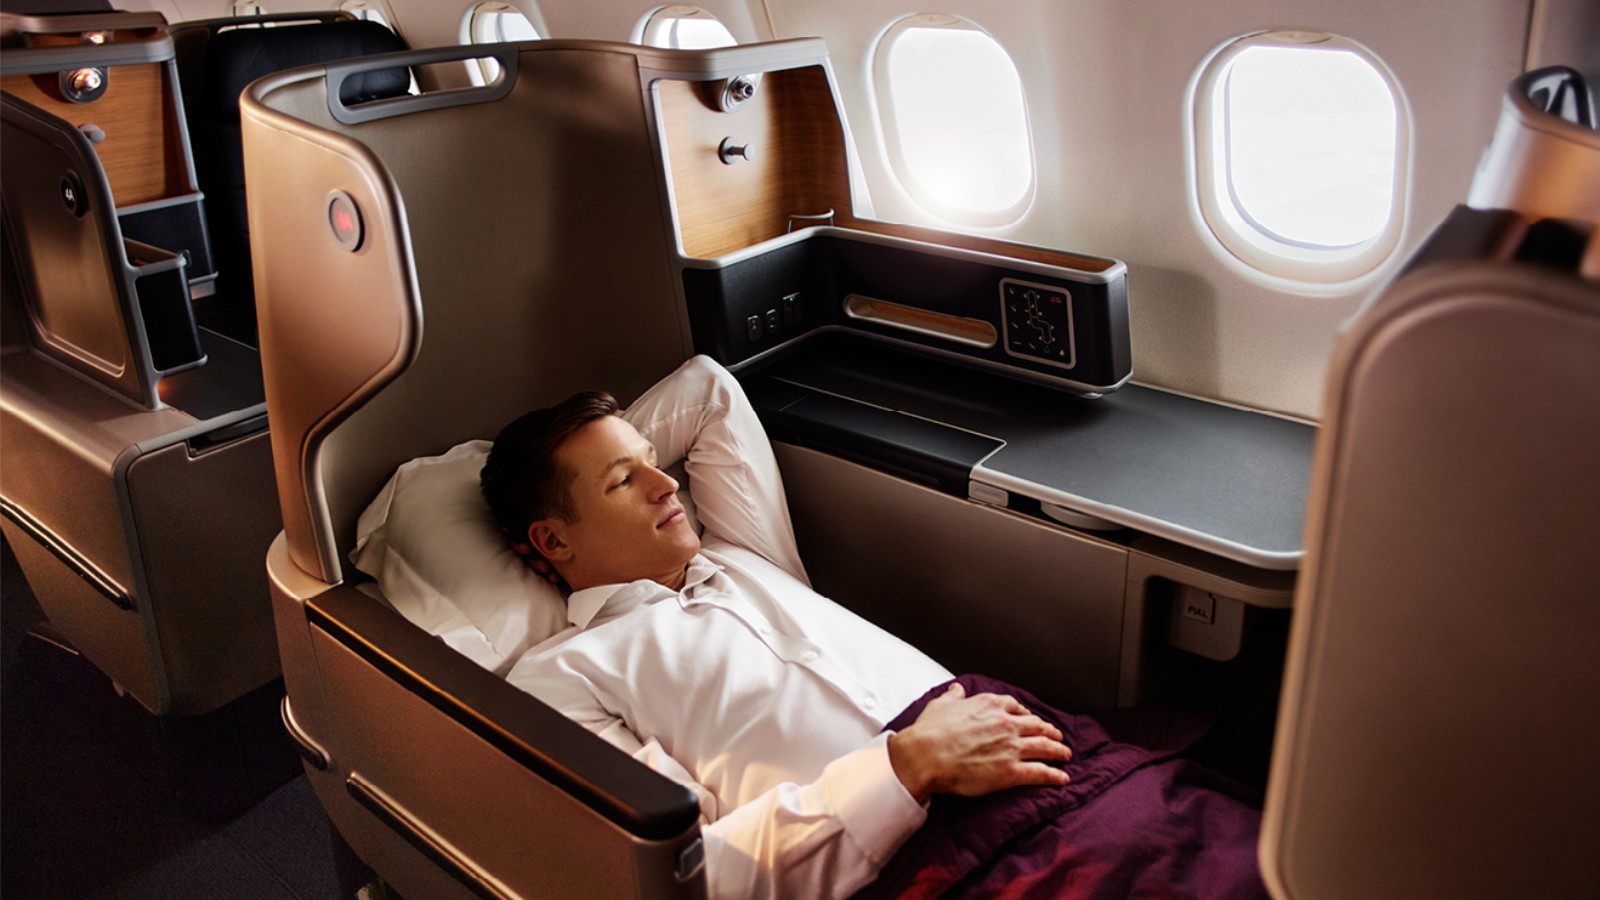 Elevated Elegance: The Qantas Business Class Experience